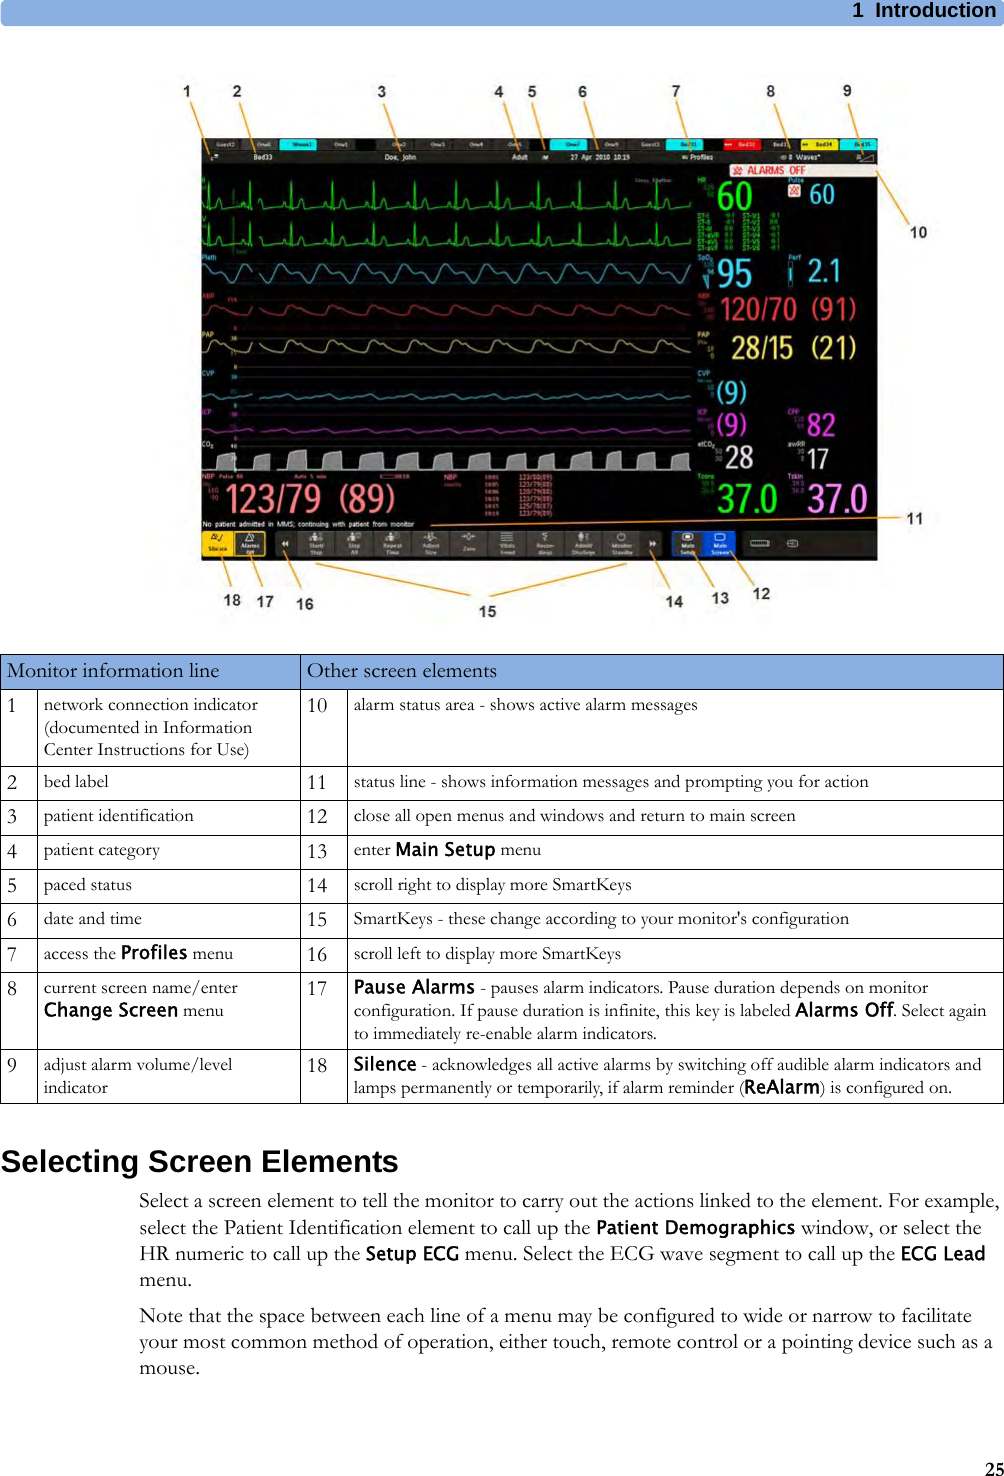 1 Introduction25Selecting Screen ElementsSelect a screen element to tell the monitor to carry out the actions linked to the element. For example, select the Patient Identification element to call up the Patient Demographics window, or select the HR numeric to call up the Setup ECG menu. Select the ECG wave segment to call up the ECG Lead menu.Note that the space between each line of a menu may be configured to wide or narrow to facilitate your most common method of operation, either touch, remote control or a pointing device such as a mouse.Monitor information line Other screen elements1network connection indicator (documented in Information Center Instructions for Use)10 alarm status area - shows active alarm messages2bed label 11 status line - shows information messages and prompting you for action3patient identification 12 close all open menus and windows and return to main screen4patient category 13 enter Main Setup menu5paced status 14 scroll right to display more SmartKeys6date and time 15 SmartKeys - these change according to your monitor&apos;s configuration7access the Profiles menu 16 scroll left to display more SmartKeys8current screen name/enter Change Screen menu 17 Pause Alarms - pauses alarm indicators. Pause duration depends on monitor configuration. If pause duration is infinite, this key is labeled Alarms Off. Select again to immediately re-enable alarm indicators.9adjust alarm volume/level indicator 18 Silence - acknowledges all active alarms by switching off audible alarm indicators and lamps permanently or temporarily, if alarm reminder (ReAlarm) is configured on.